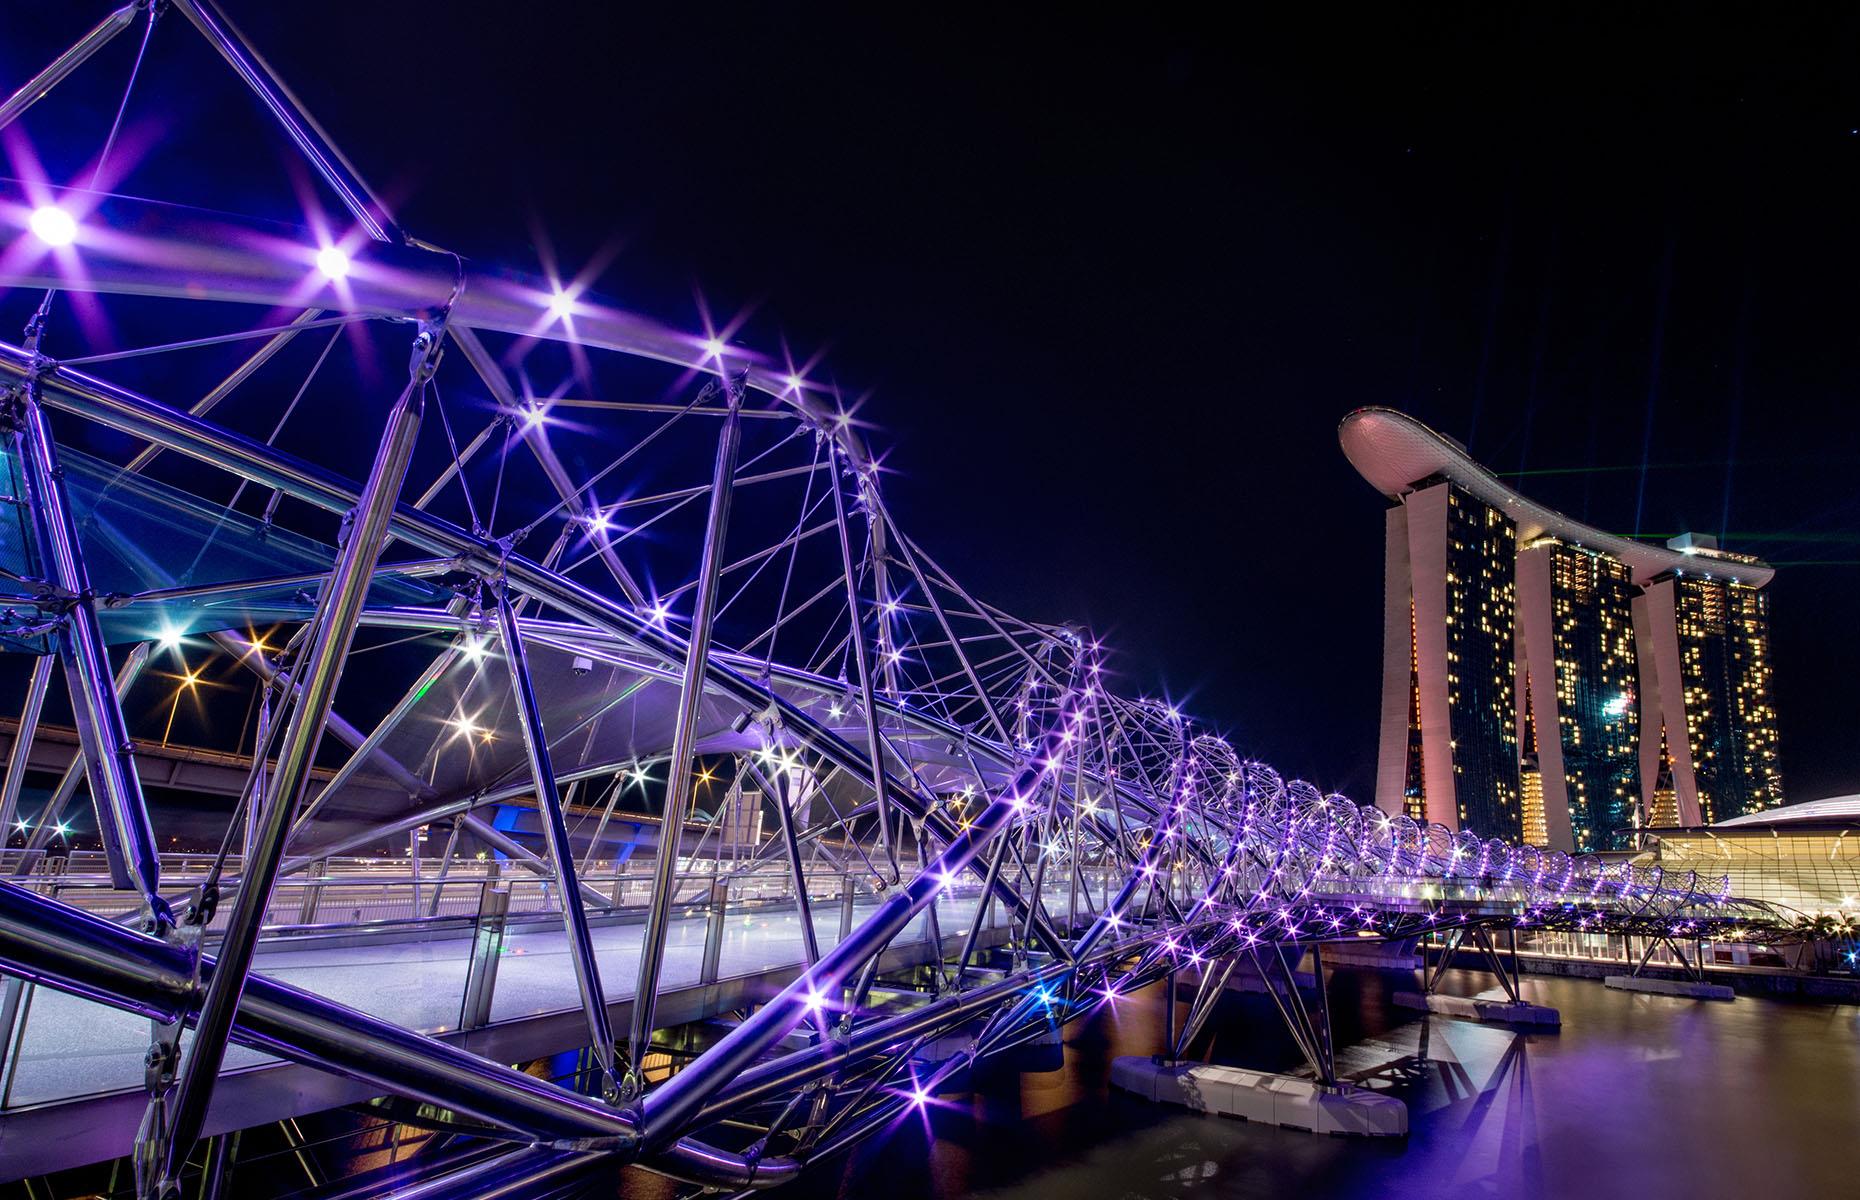 This 919-foot-long curved, double helix bridge is the first of its kind in the world. Linking the Marina Center with Marina South, a wander across this DNA structure-inspired walkway is a must. It’s particularly spectacular at night, when the stainless steel is lit up in blue, so get your camera ready but take advantage of the four viewing platforms on each side so you don’t get in anyone’s way. Spanning the Singapore River, it’s become a standout landmark ever since it opened in 2010.